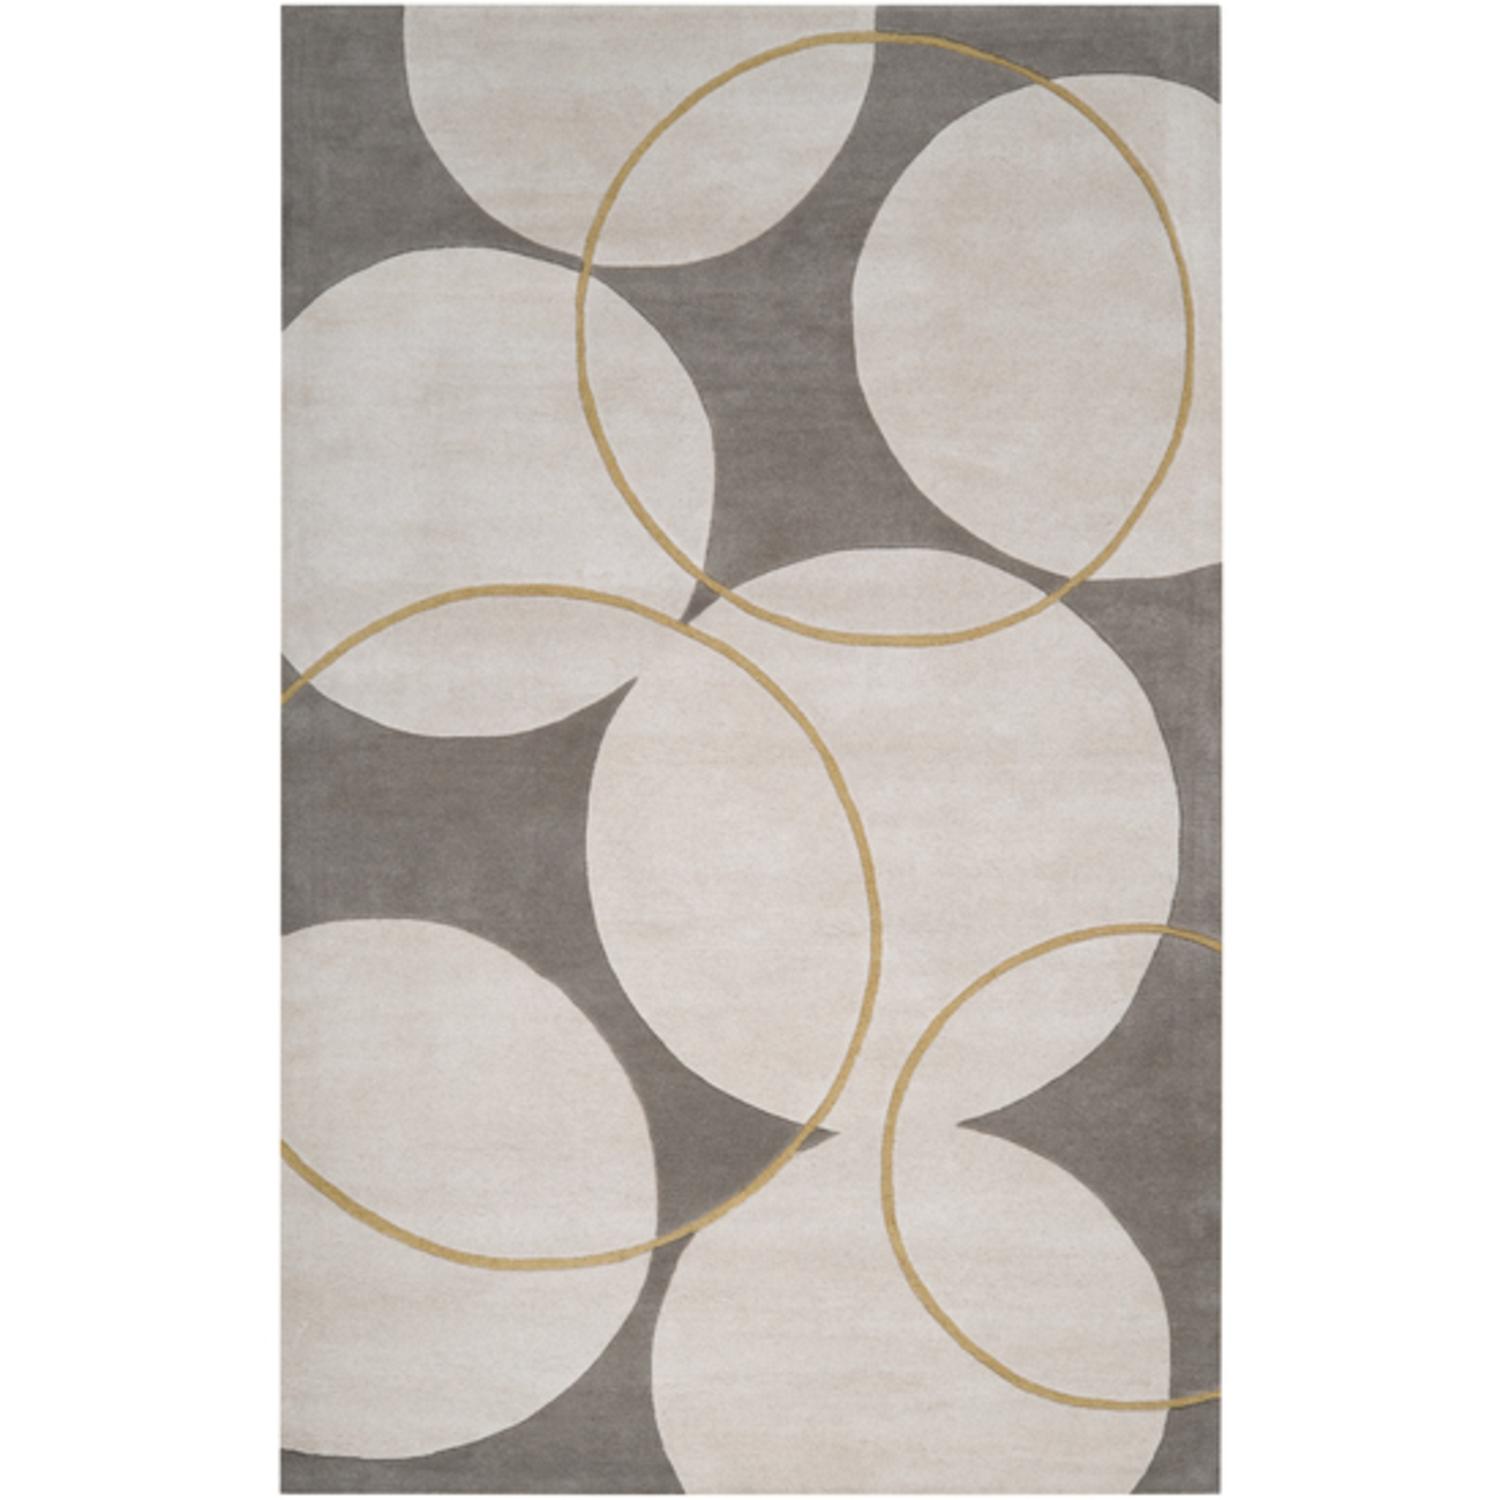 CC Home Furnishings  5' x 8' Bubble Spectacular Parchment and Mustard Yellow Wool Area Throw Rug